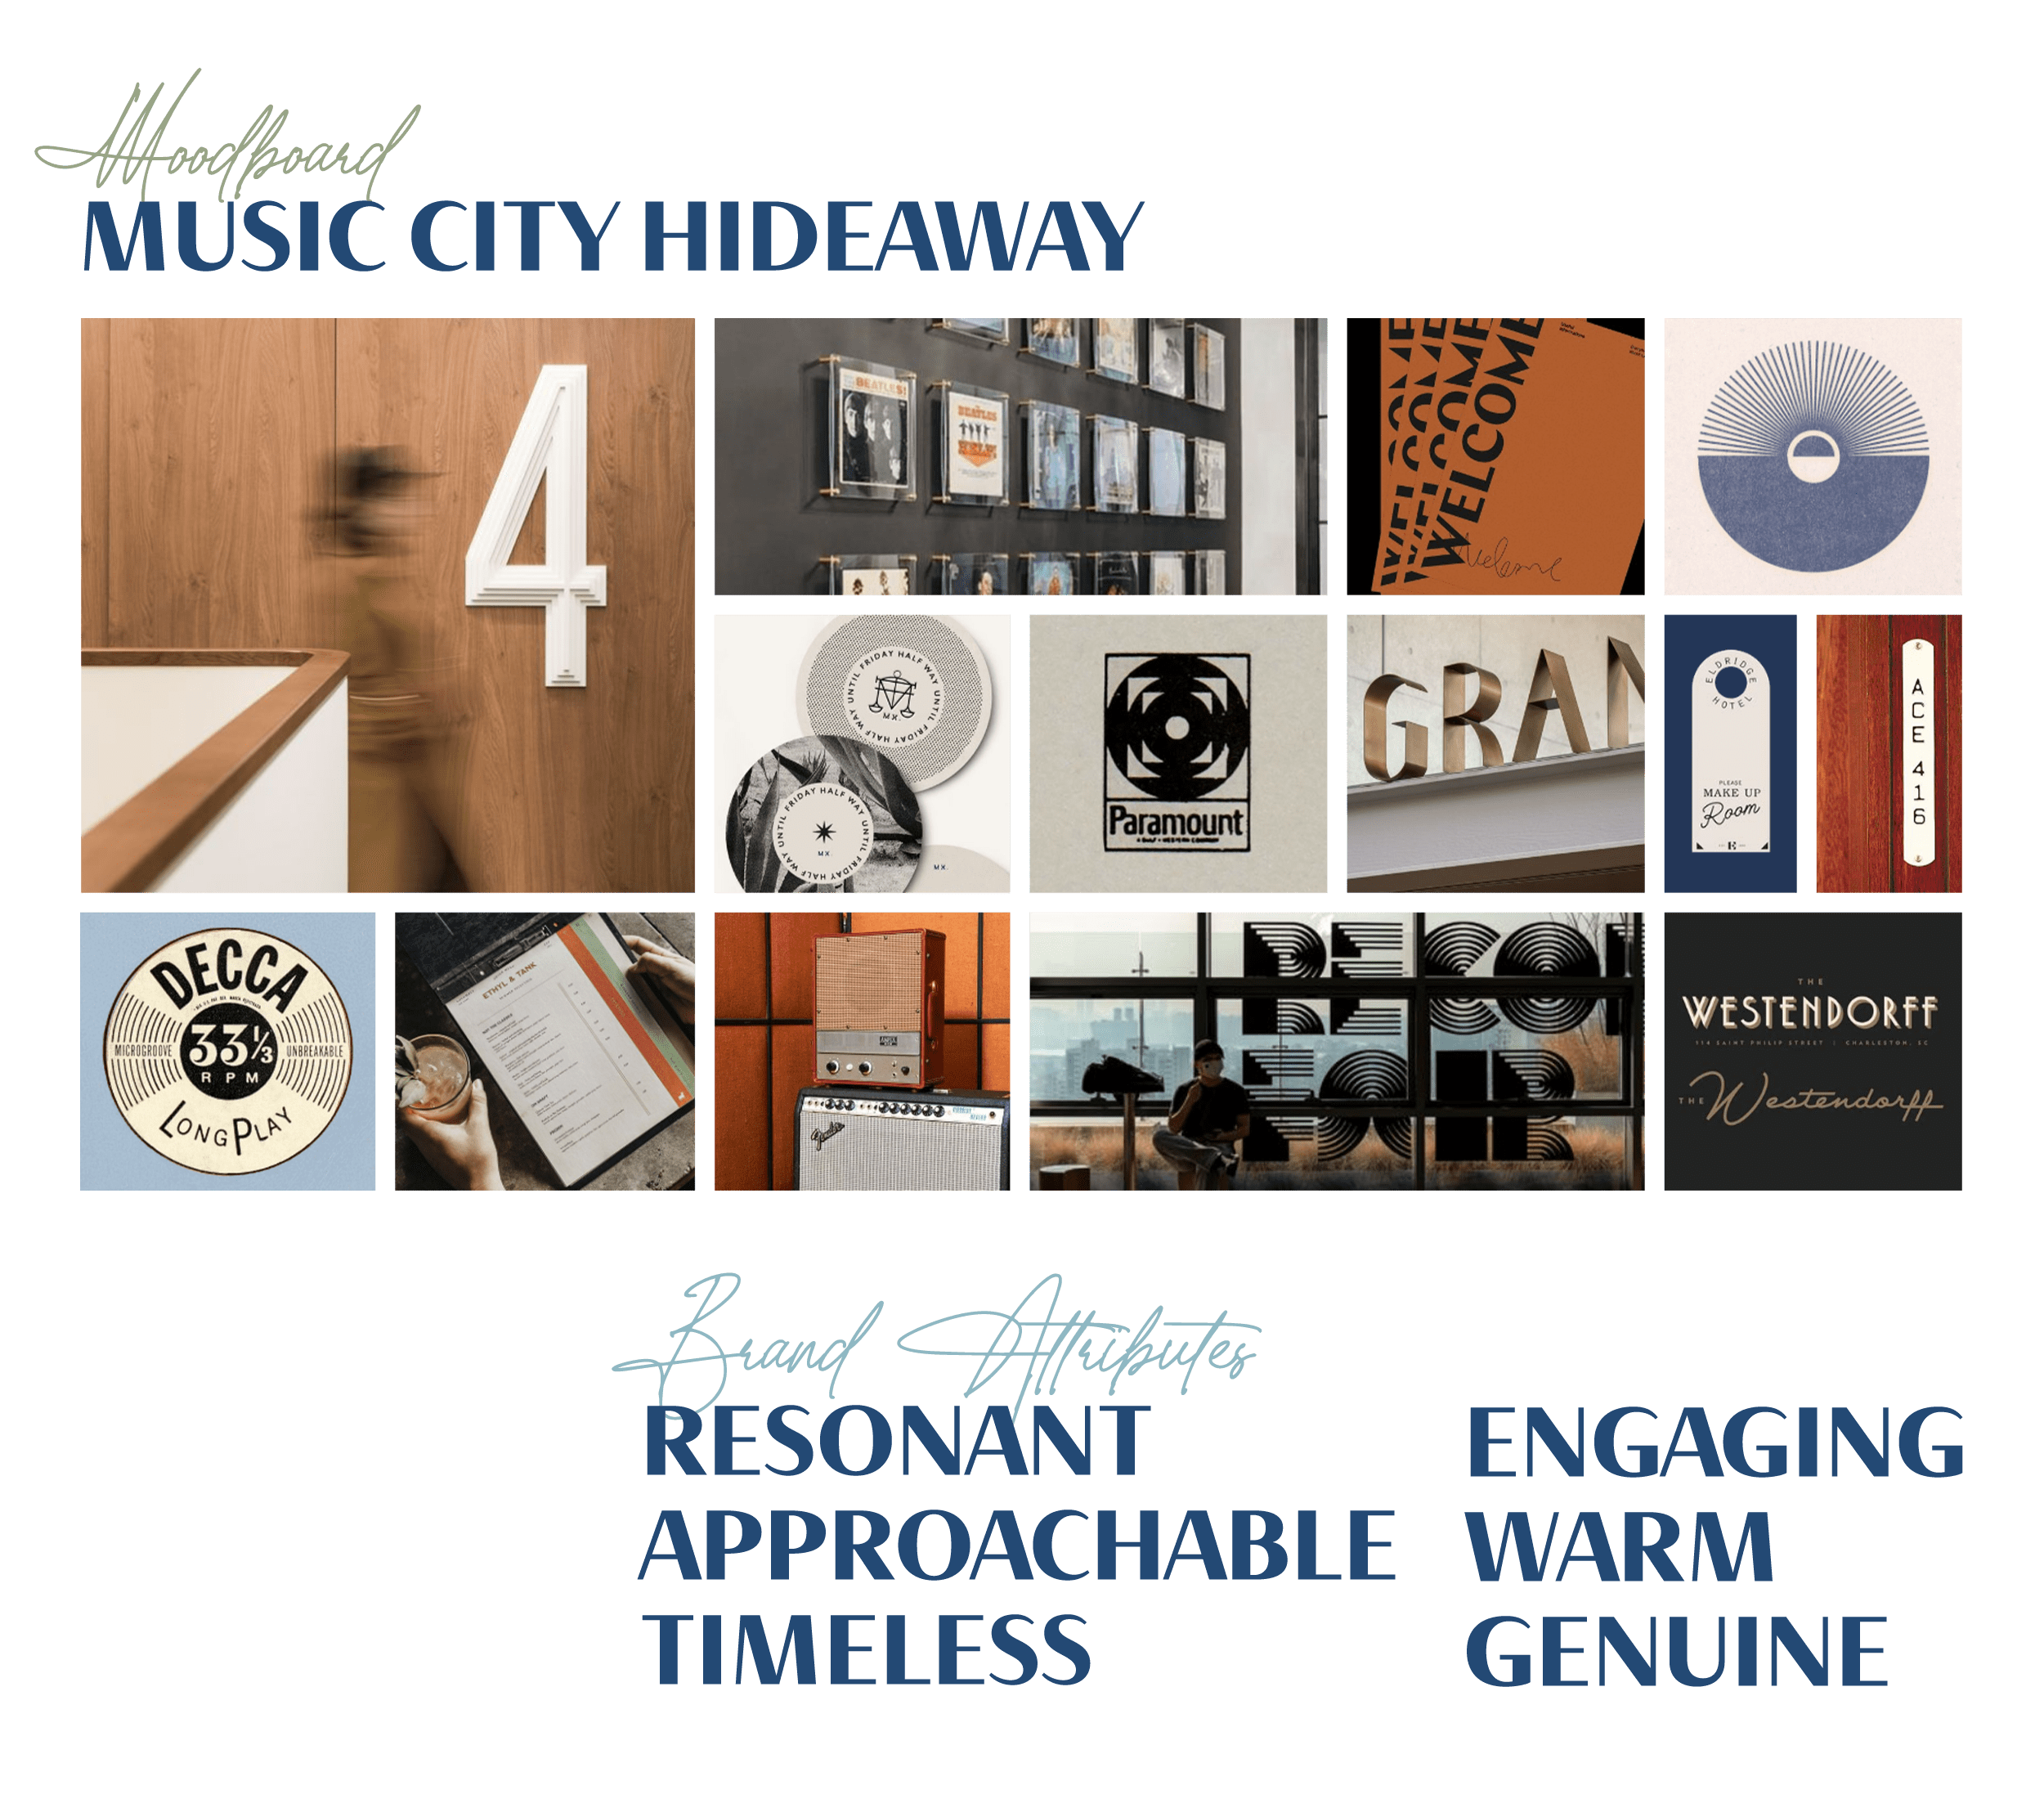 Moodboard imagery with warm tones and retro record-label inspired graphics with Music City Hideaway text and brand attributes which read 